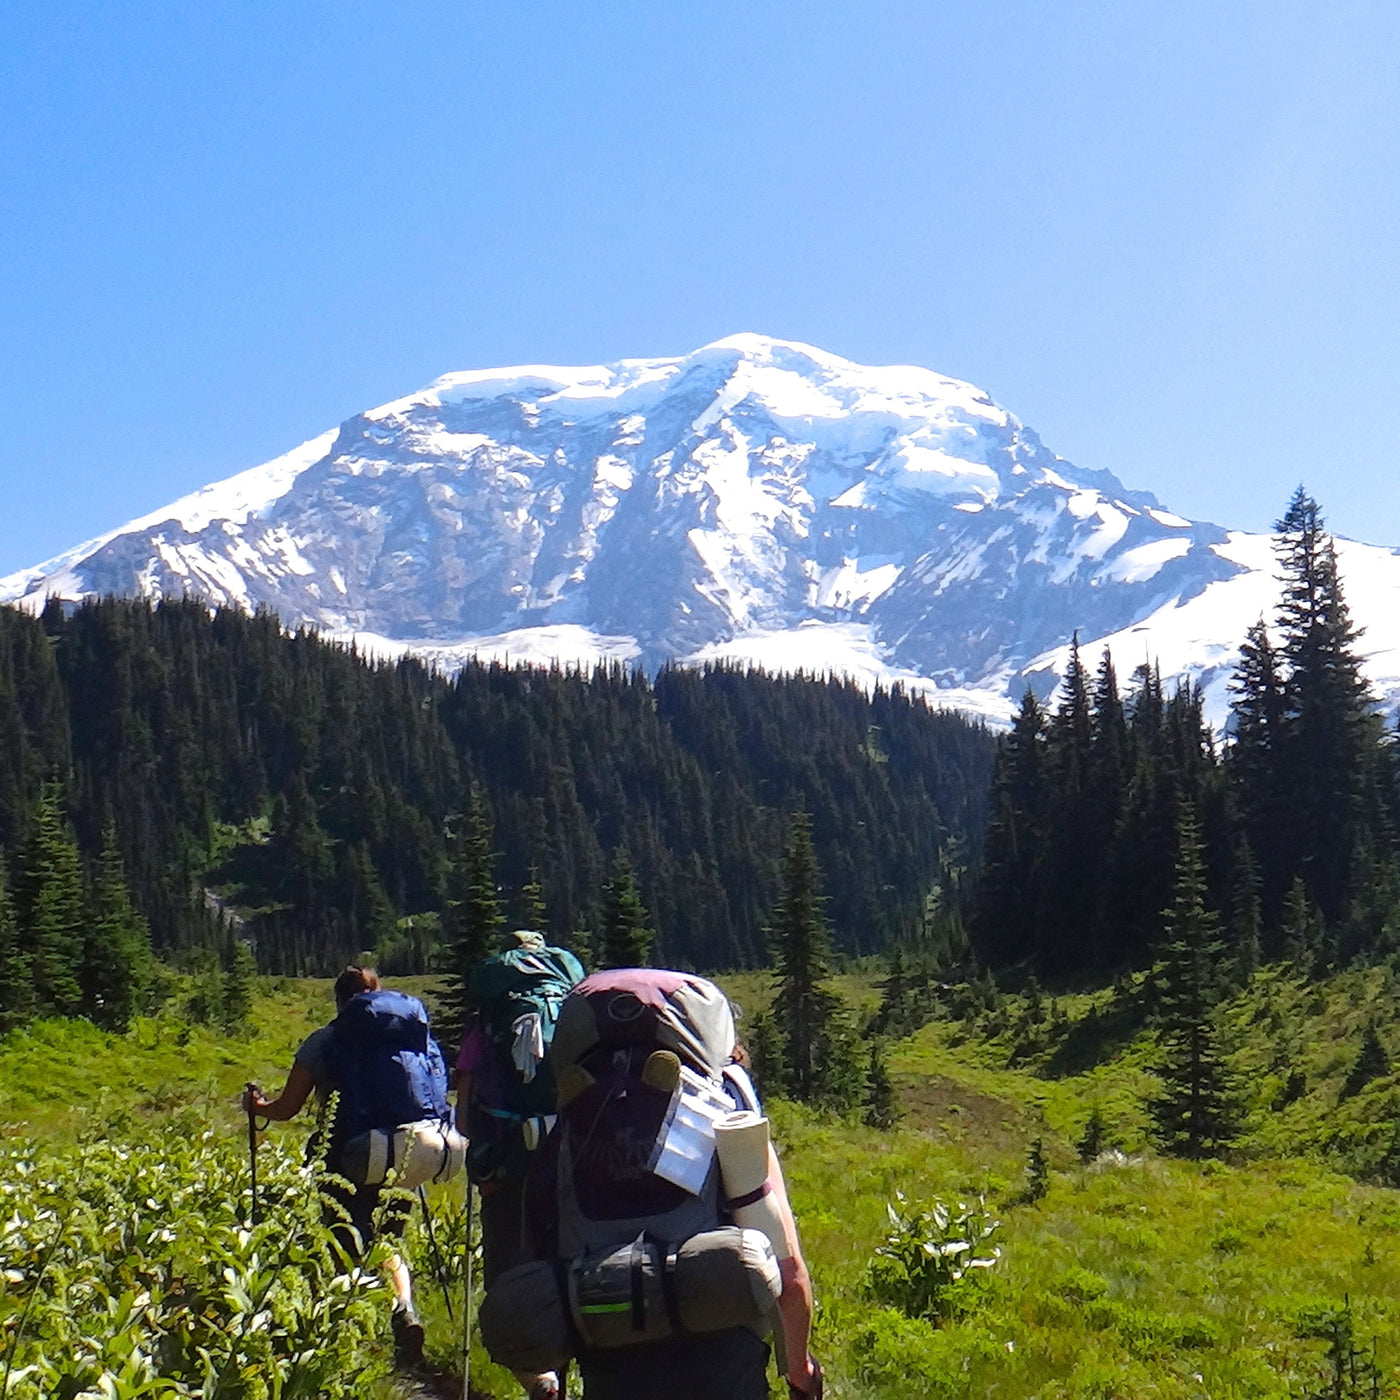 Looking at Mt. Rainier with backpackers in foreground